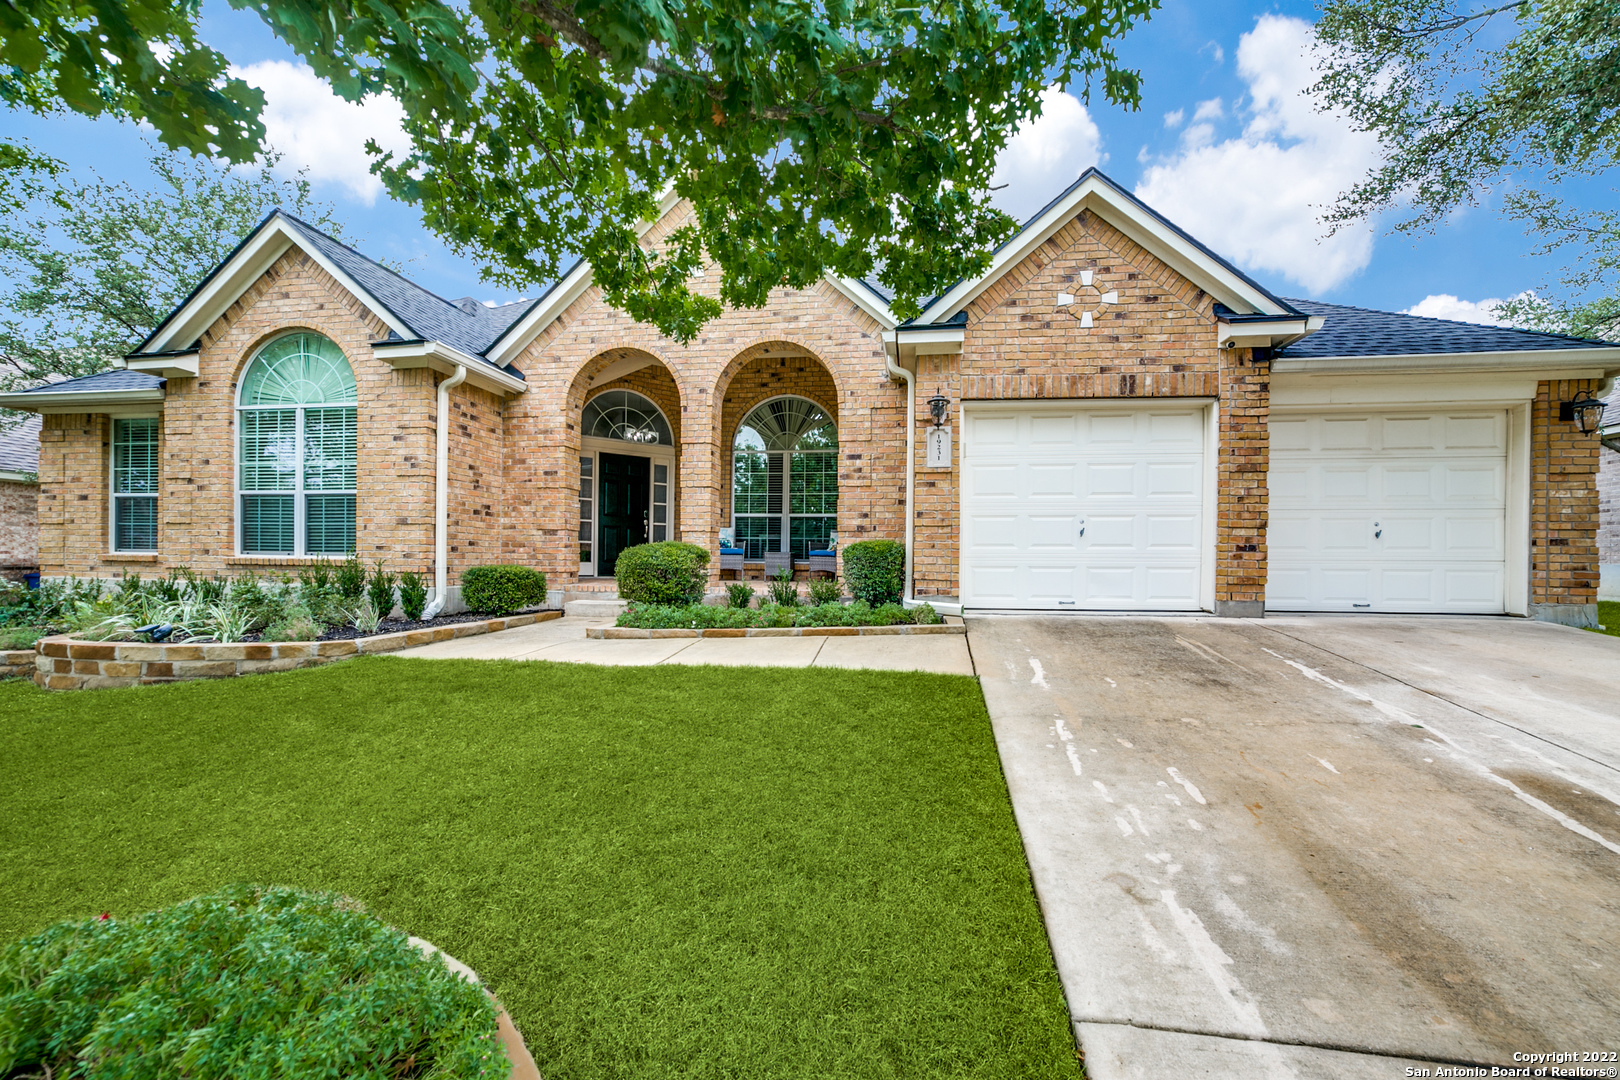 This amazing Pulte home was built in 2004 and showcases a unique split floor plan with all bedrooms downstairs. Enjoy the classic American curb appeal of this red brick home with arched windows and massive front porch. Upon entry, you are welcomed by soaring high ceilings and ceramic tiles throughout the common areas. The private study with built-in shelving off the entry provides a space for those working or studying from home! After passing the gorgeous formal dining room, the layout opens to a massive, shared kitchen and living room. The kitchen comes equipped with plenty of storage behind oak cabinetry and a sit-in island overlooking the living room. The living room offers outdoor access, views of the back yard through massive windows, and a corner fireplace. The second floor includes a large game room with a wet bar and wireless speakers. Outside, enjoy a beautiful Keith Zars heated pool with adjoining spa and outdoor kitchen. This home is updated throughout from new roof, new A/C unit, new tile and laminate flooring, updated primary bathroom, primary bedroom custom closet, Rachio smart wireless sprinkler system, Wi-Fi compatible/app-controlled ceiling fans in living room and game room and much more! There are decorator touches throughout this well-maintained home!